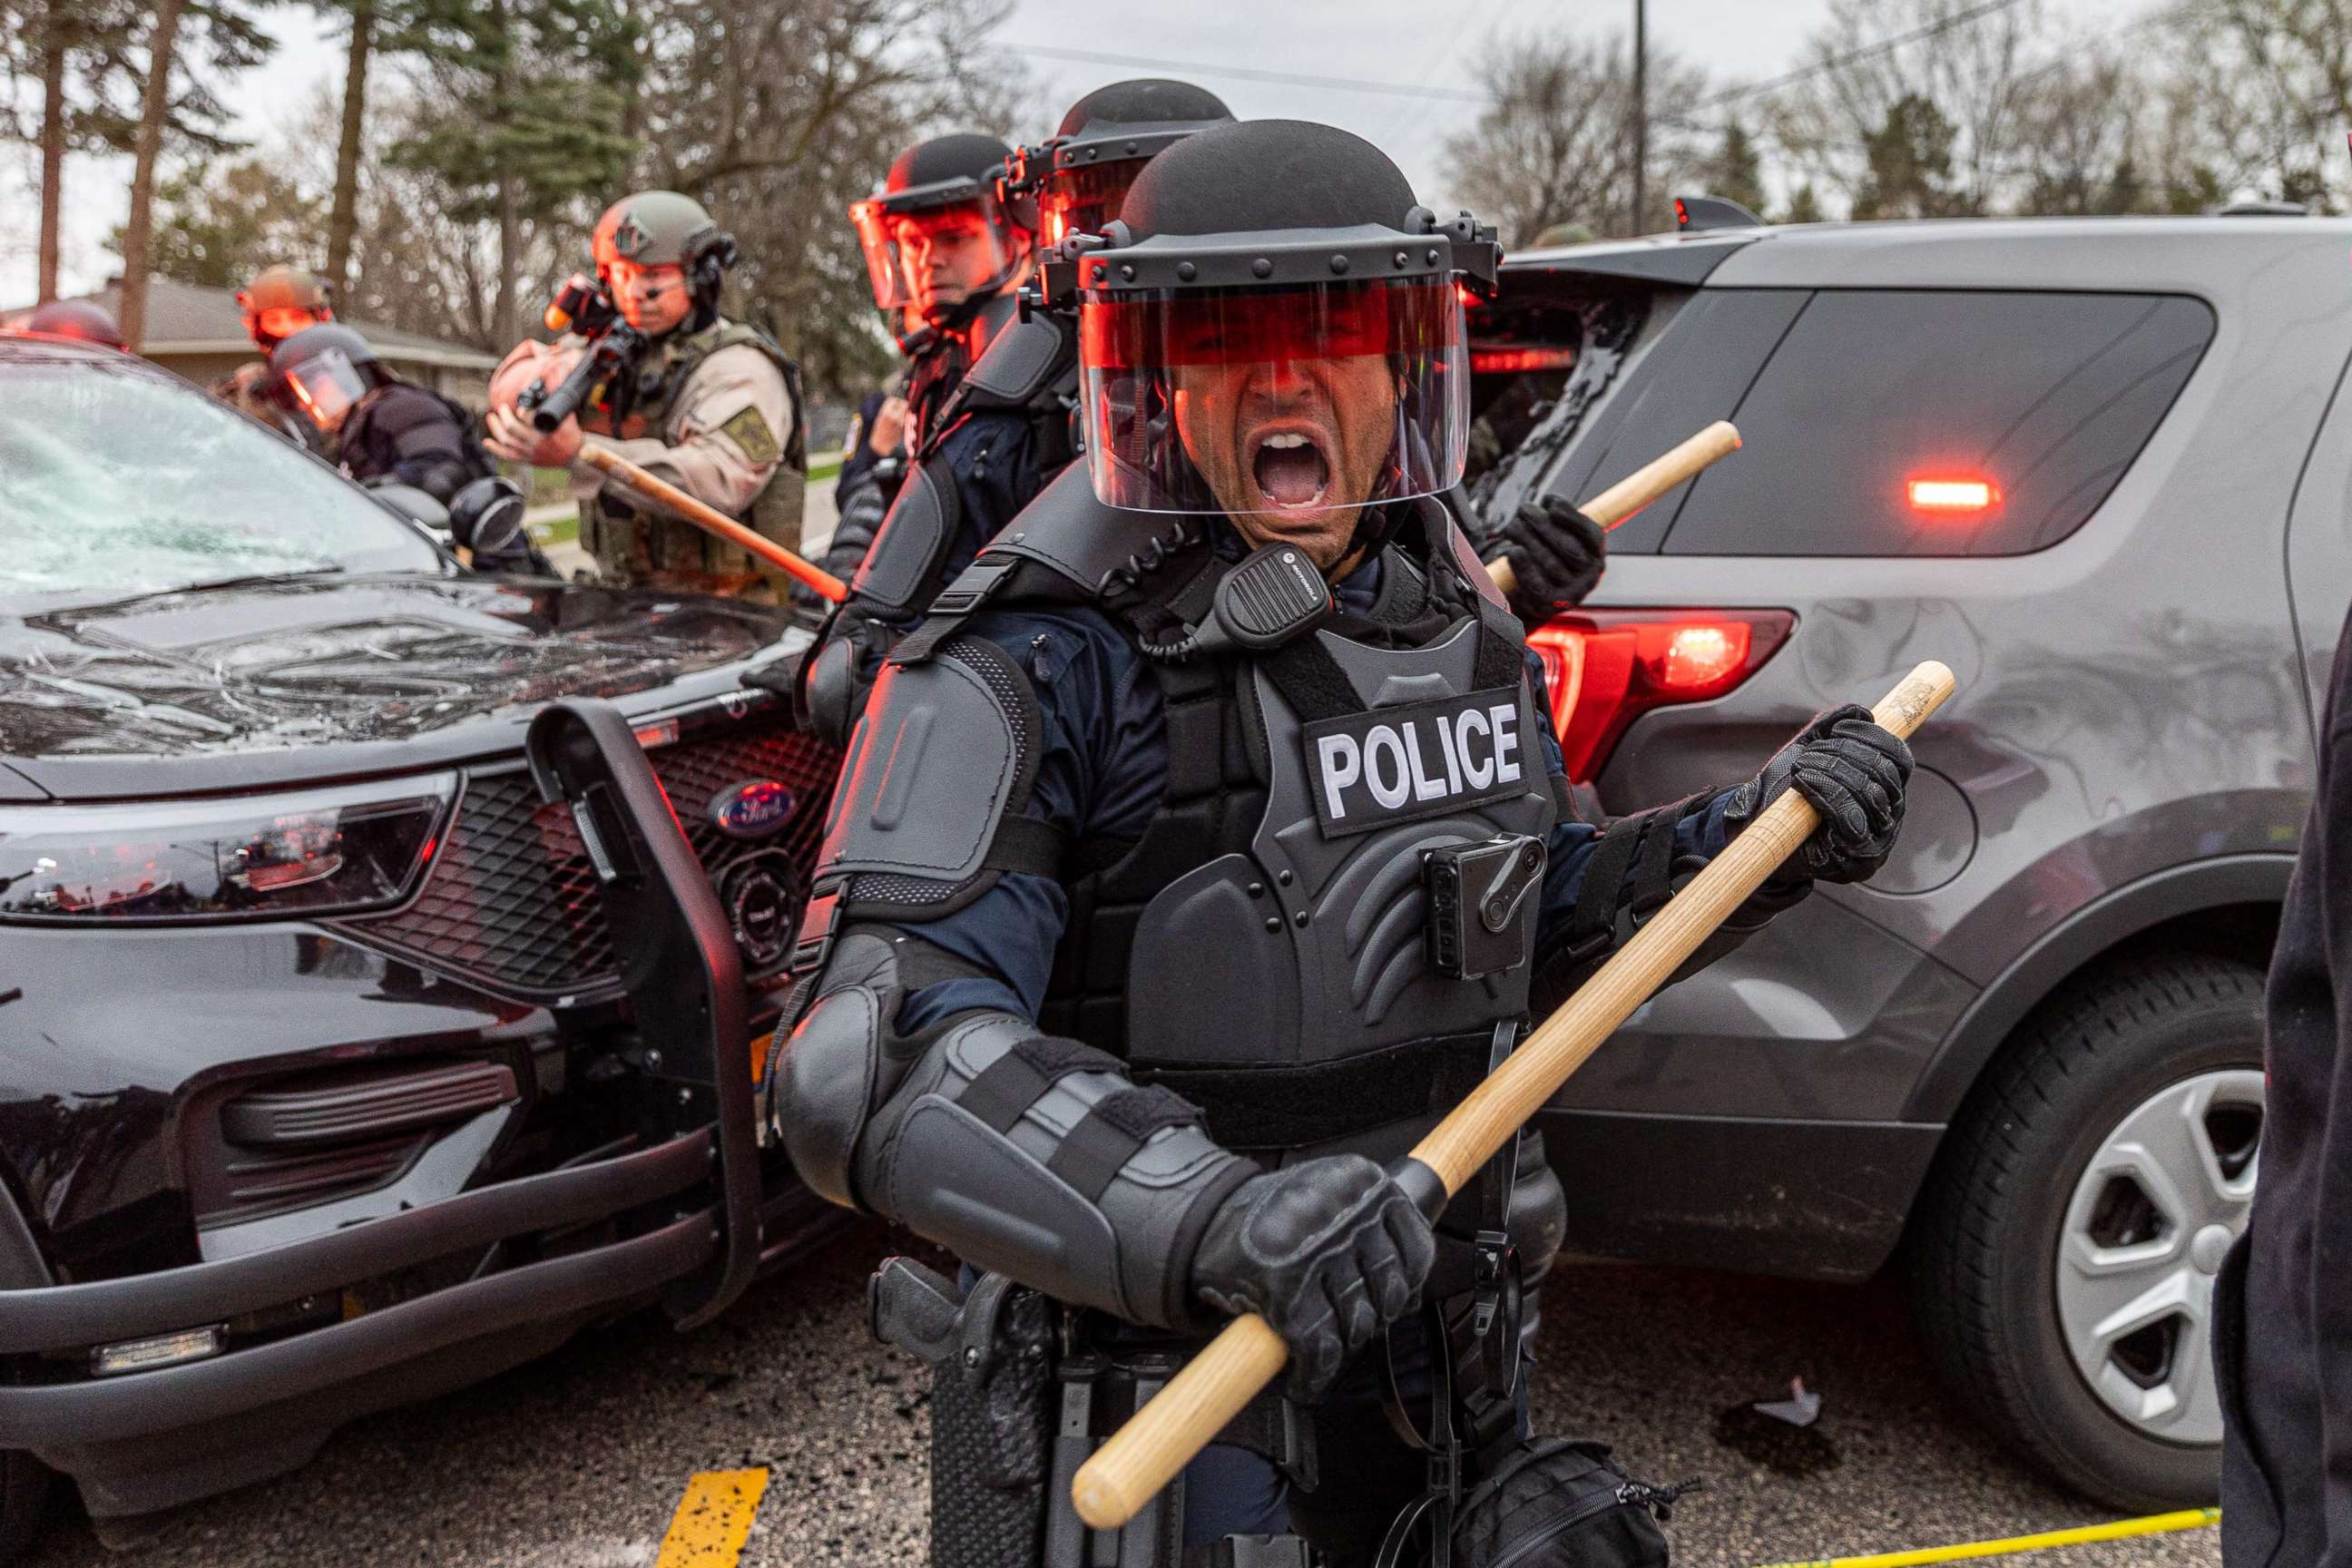 PHOTO: Police take cover as they clash with protesters after an officer shot and killed a driver during a traffic stop in Brooklyn Center, Minnesota, on April 11, 2021.